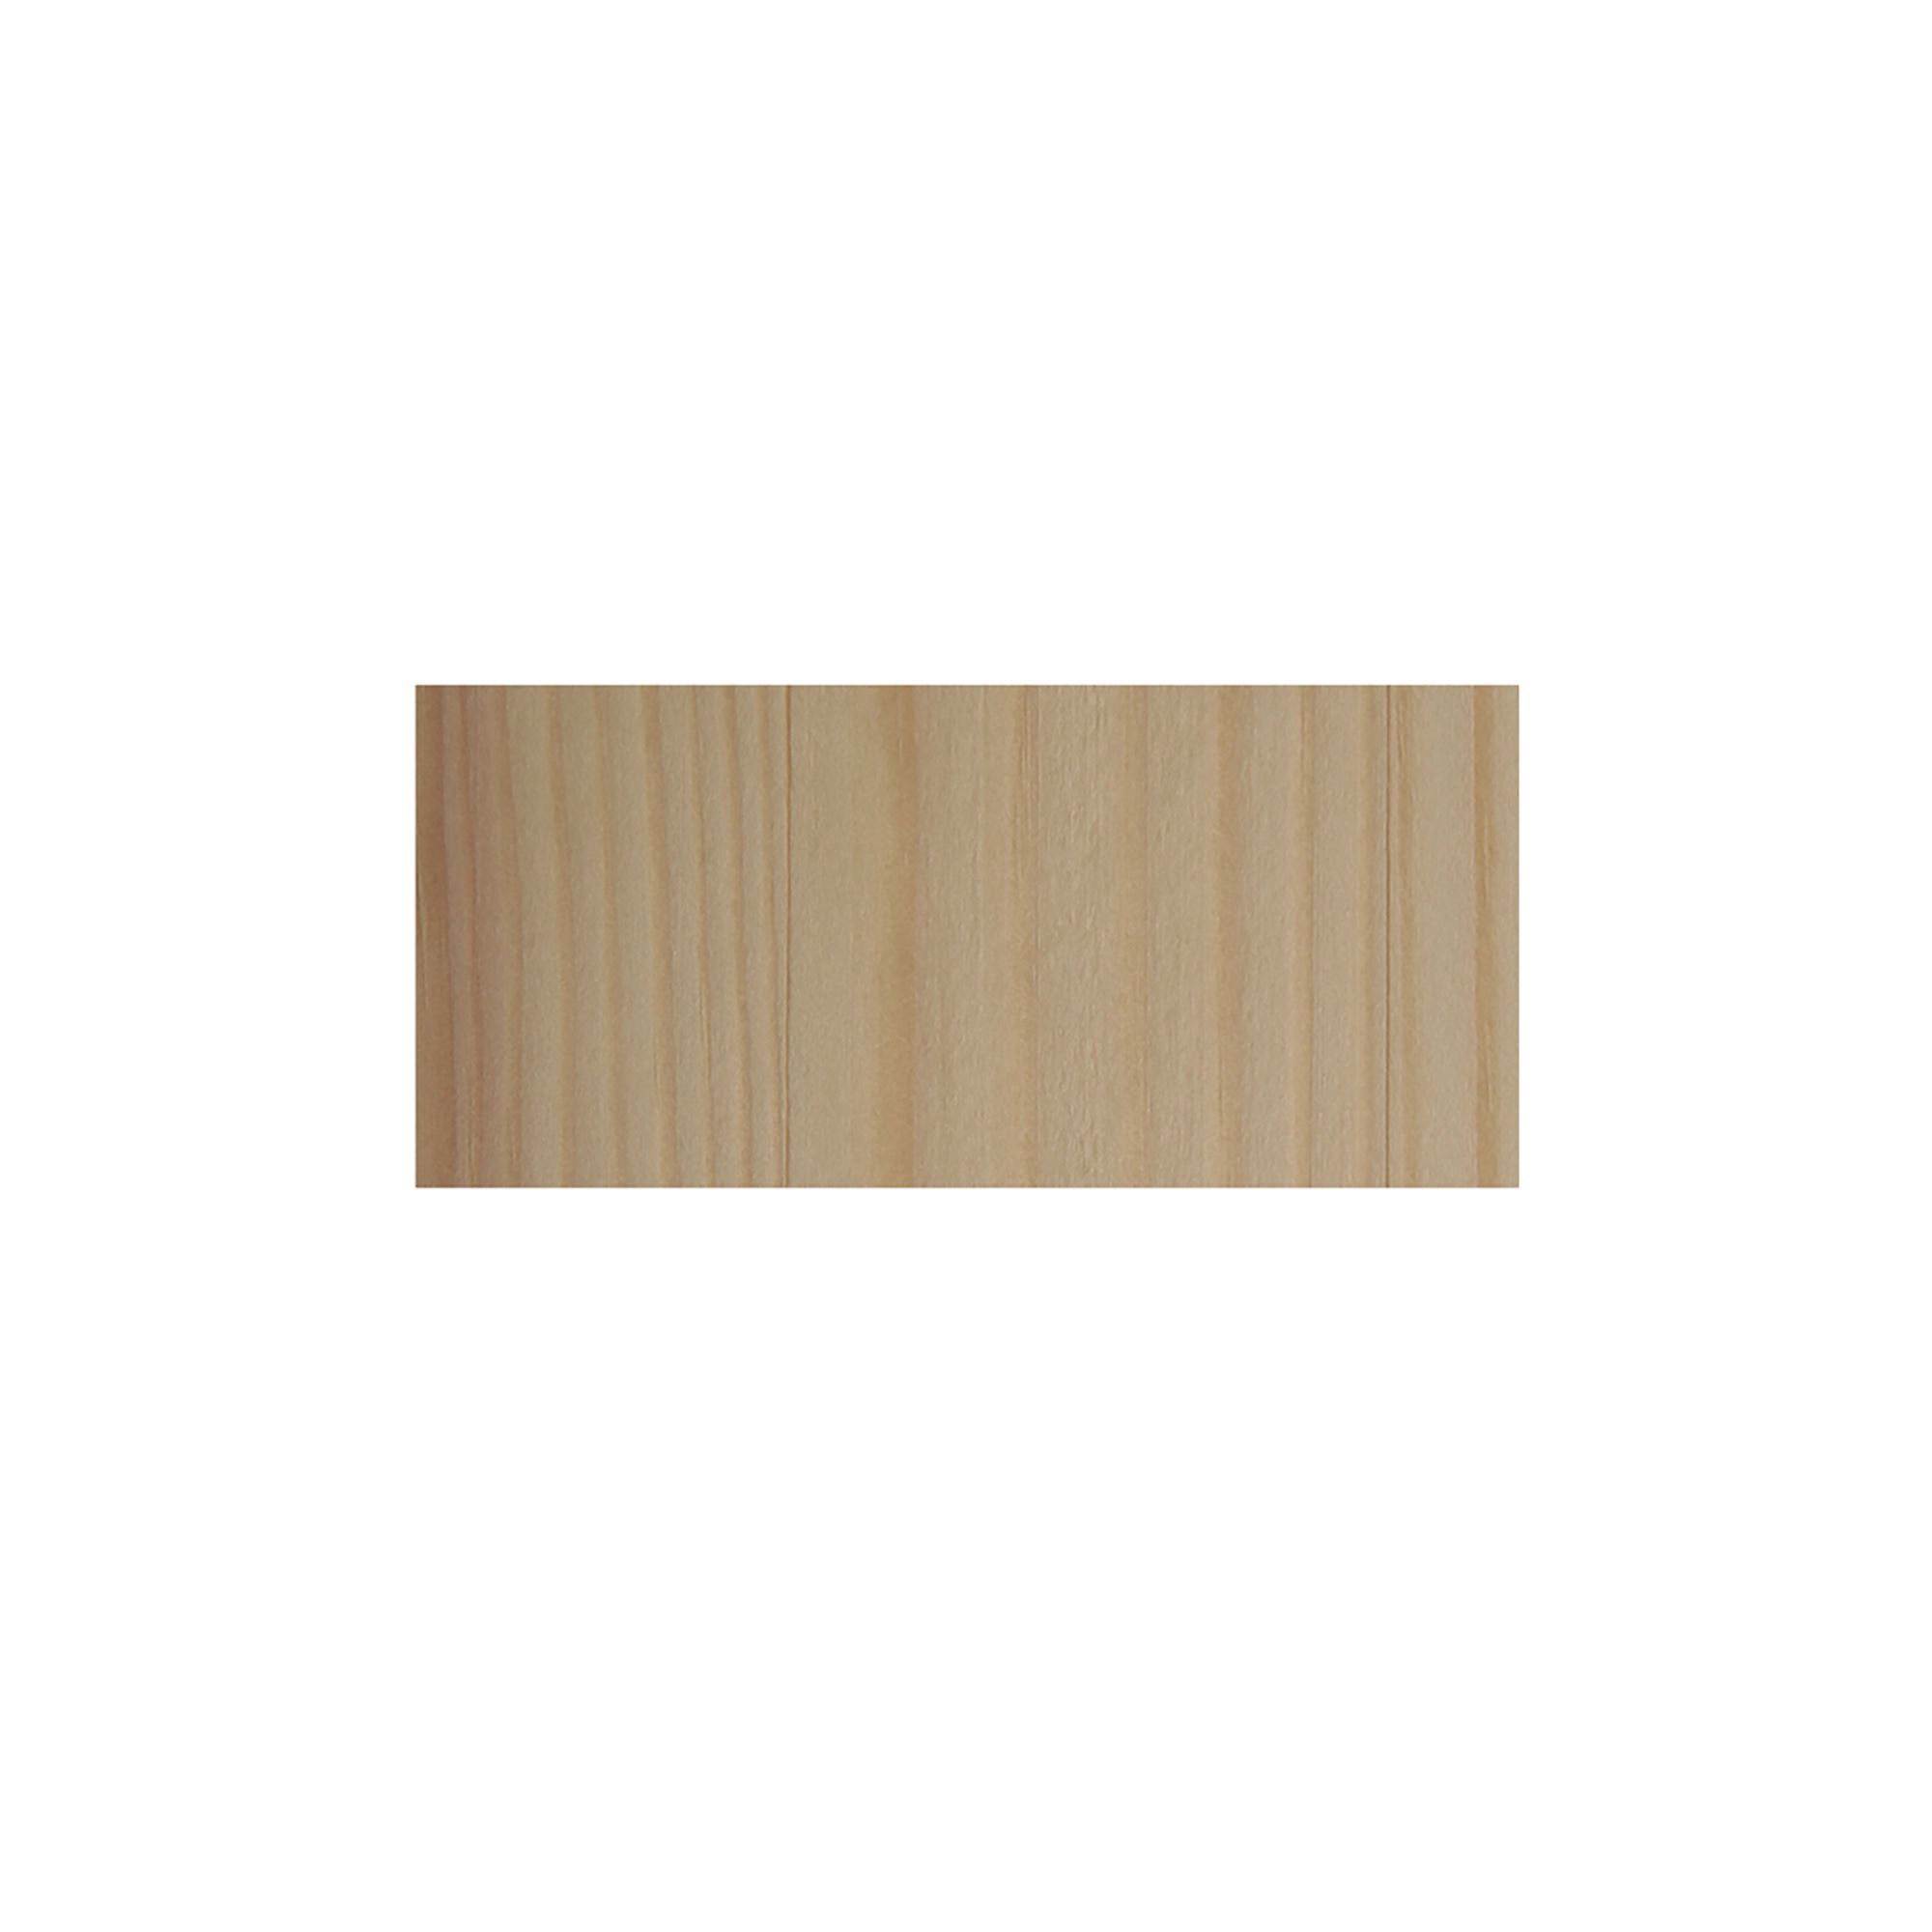 Cheshire Mouldings Smooth Planed Square edge Pine Stripwood (L)0.9m (W)25mm (T)15mm STPN51